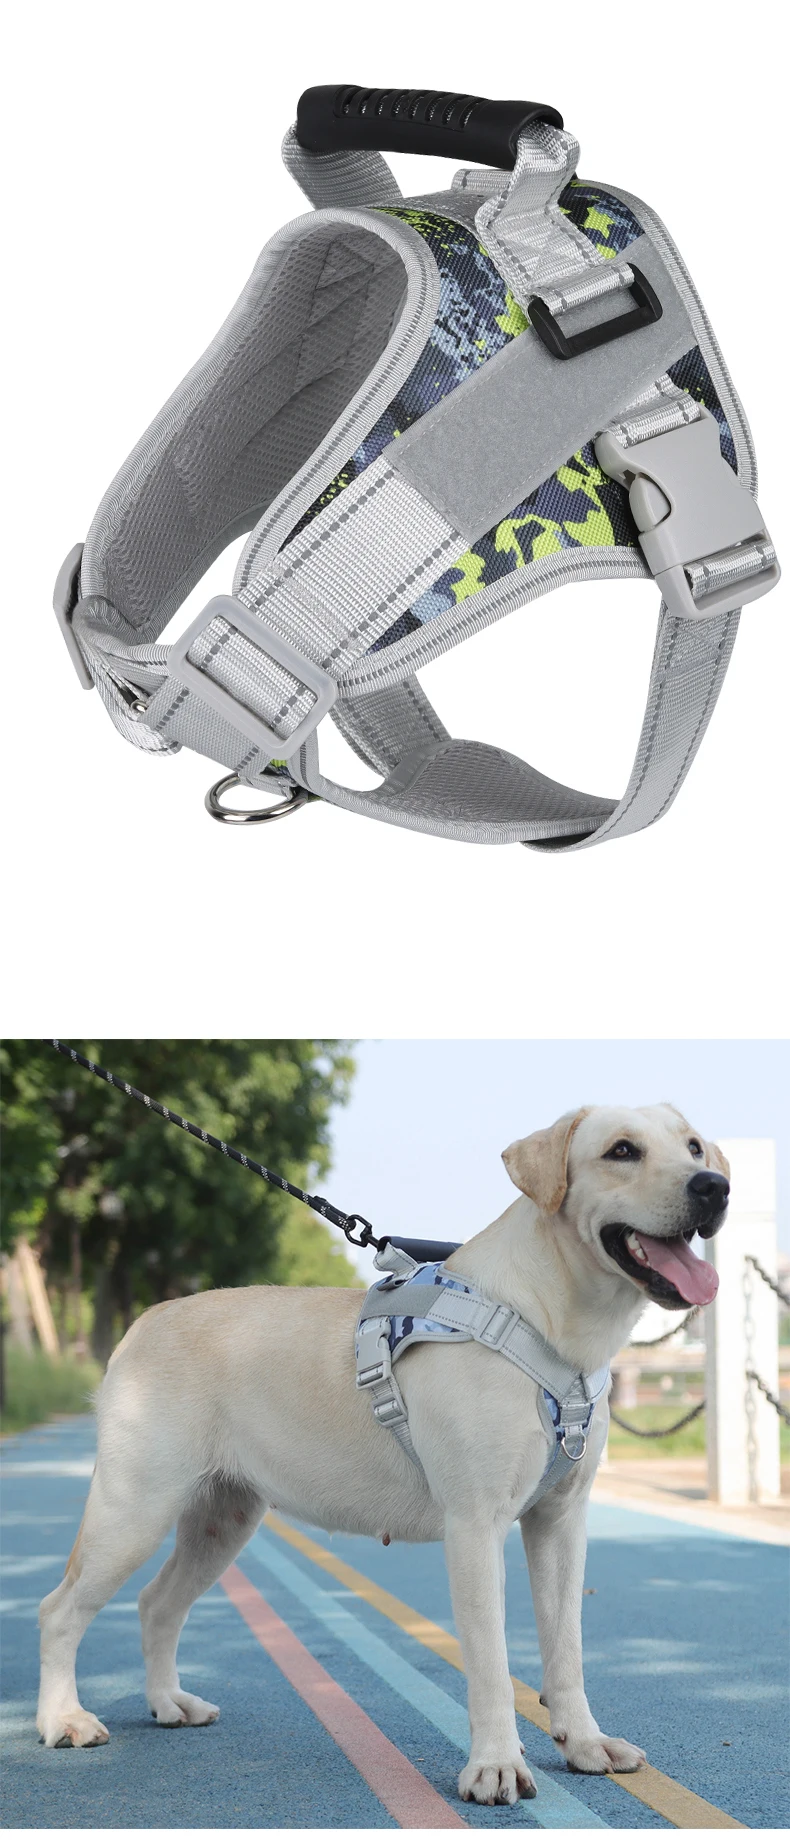 Vest For Dog Training - Reflective Anti-Dash Chest Harness for Medium to Large Dogs - Labrador Pet Supplies Made of Oxford Fabric